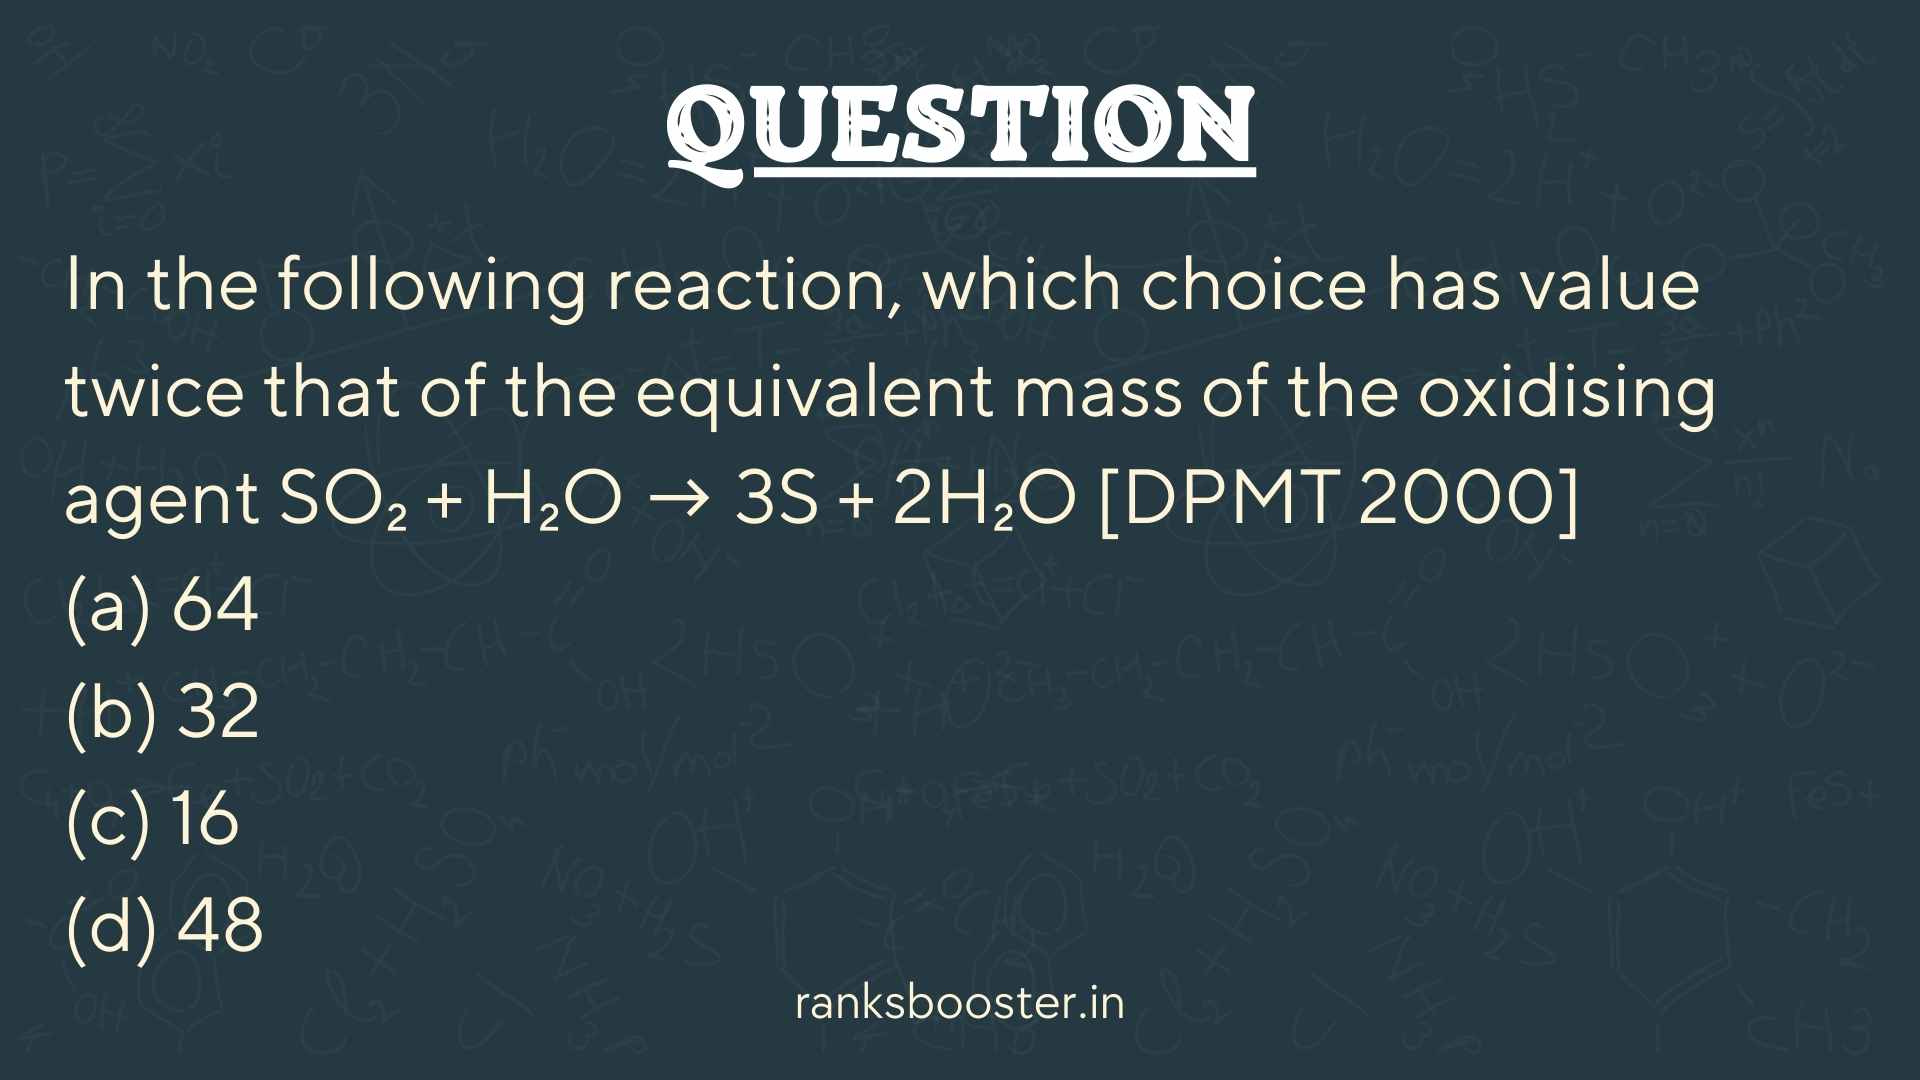 Question: In the following reaction, which choice has value twice that of the equivalent mass of the oxidising agent SO₂ + H₂O → 3S + 2H₂O [DPMT 2000] (a) 64 (b) 32 (c) 16 (d) 48